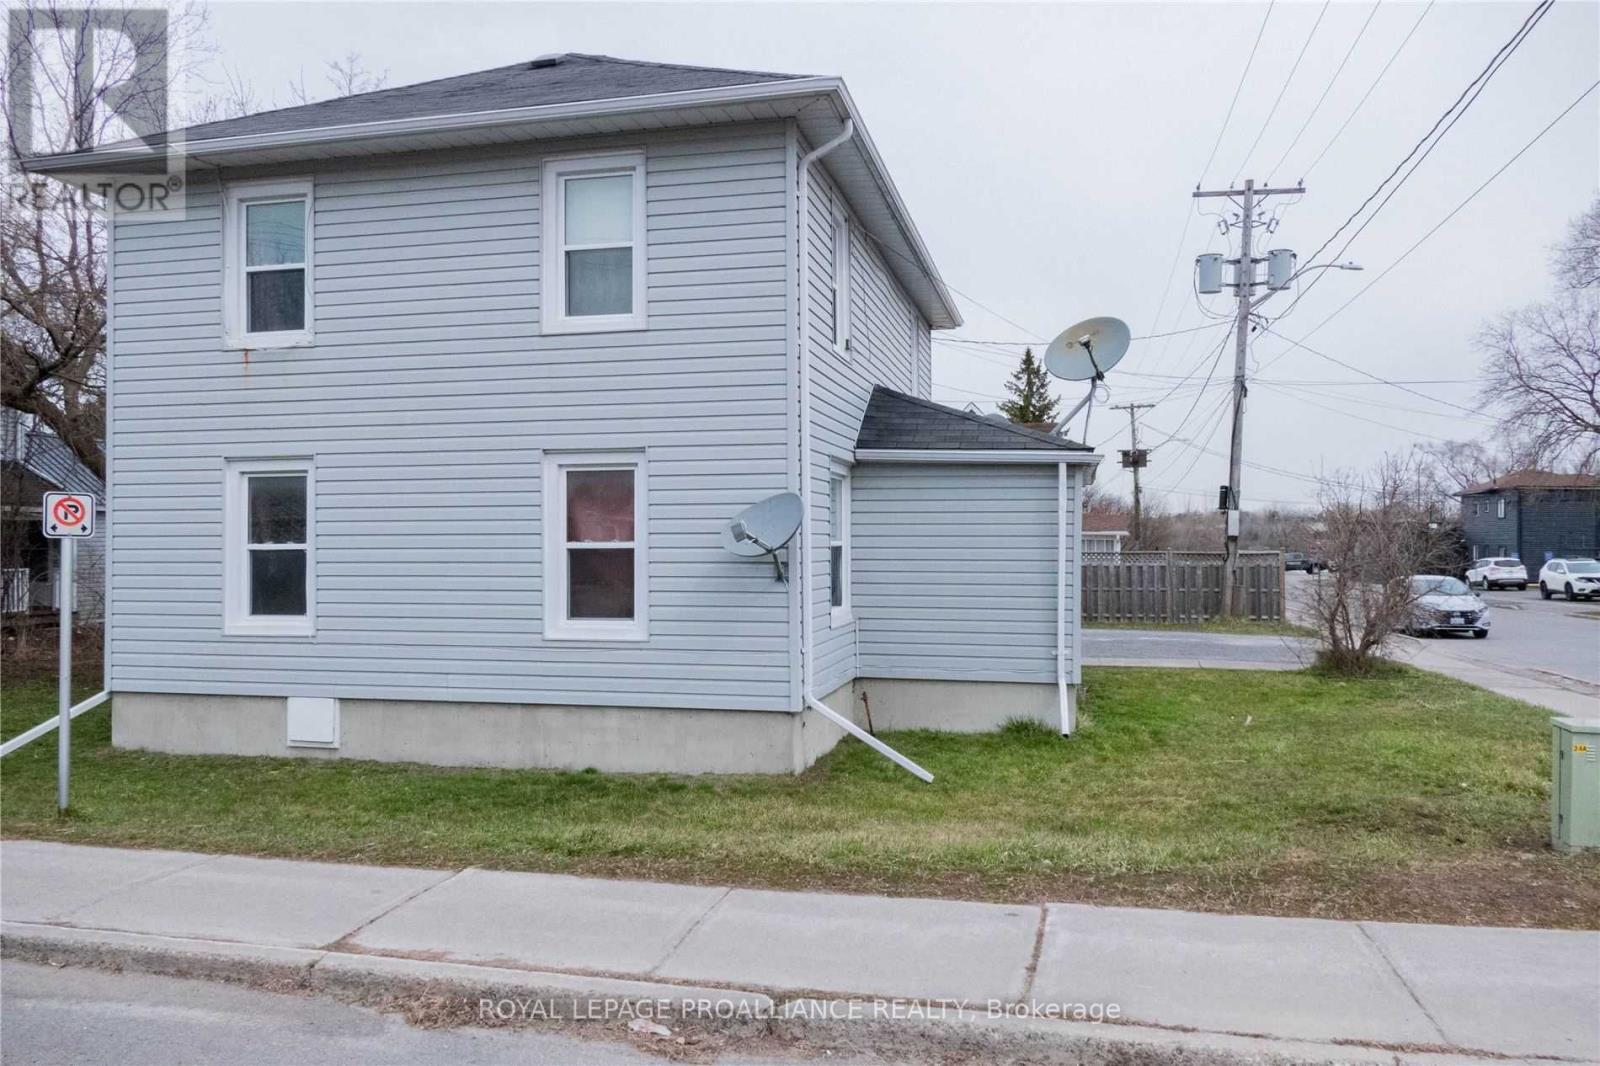 For Sale in Quinte West - 34 Alberta St, Quinte West, Ontario  K8V 4V6 - Photo 6 - X5971683